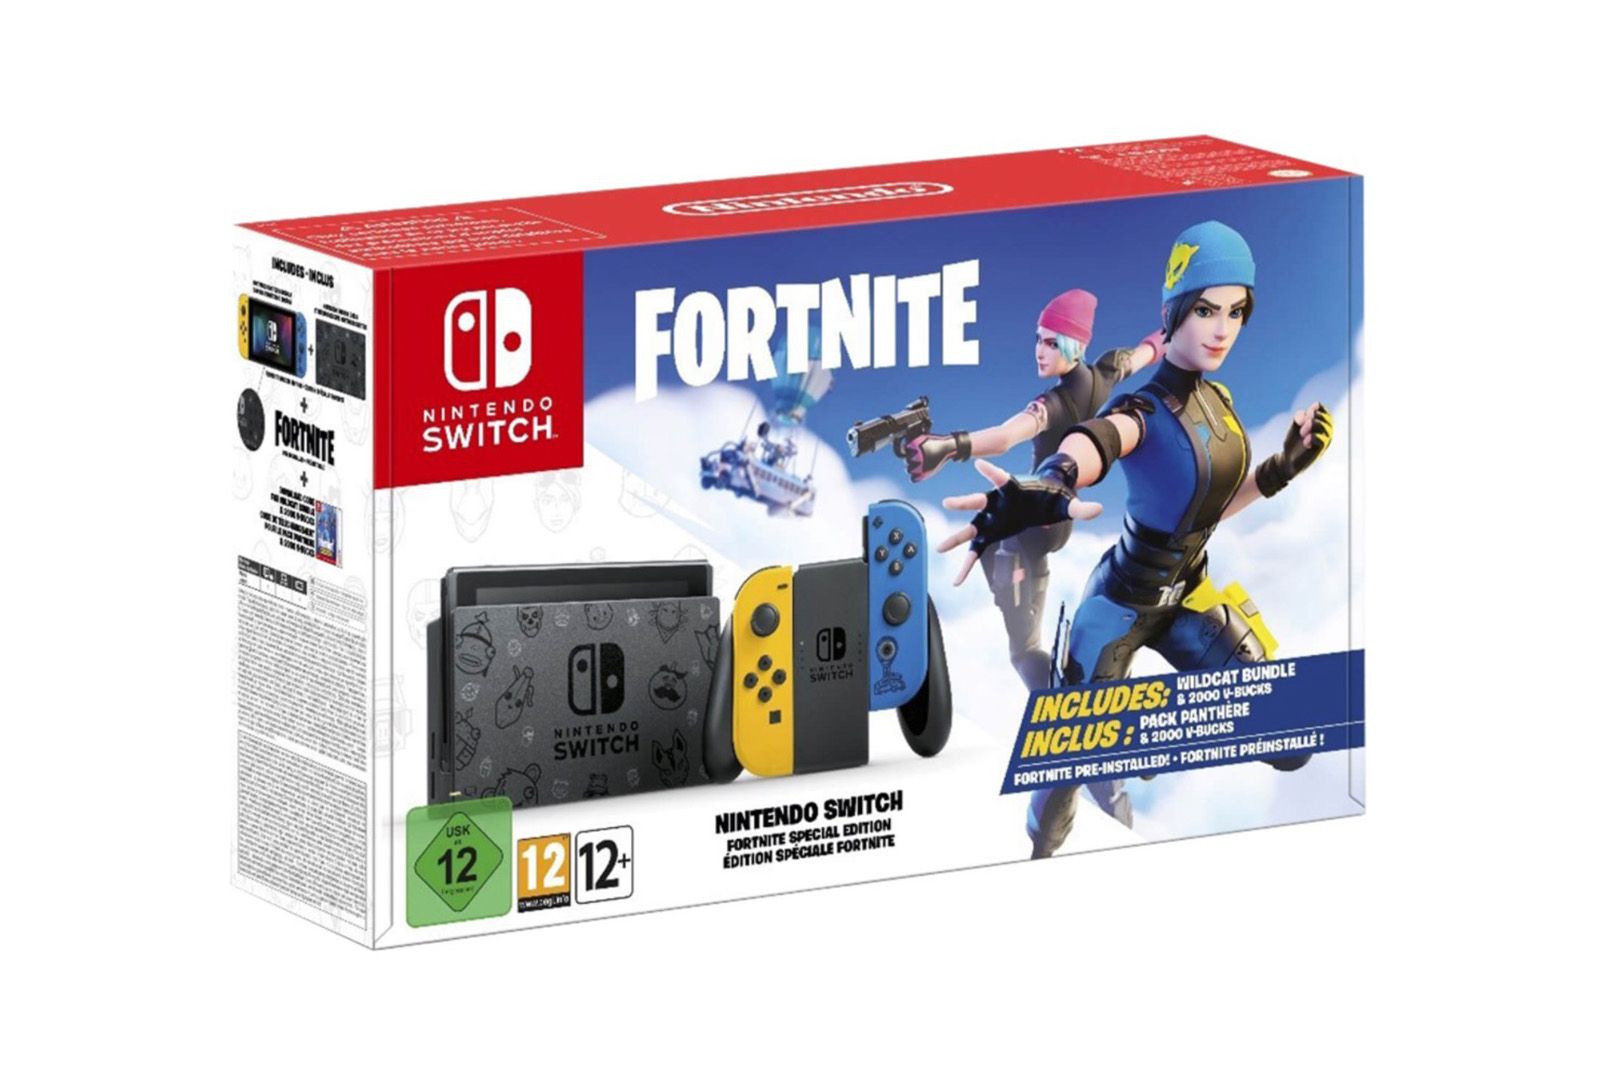 A special edition Fortnite themed Nintendo Switch bundle has been announced photo 2